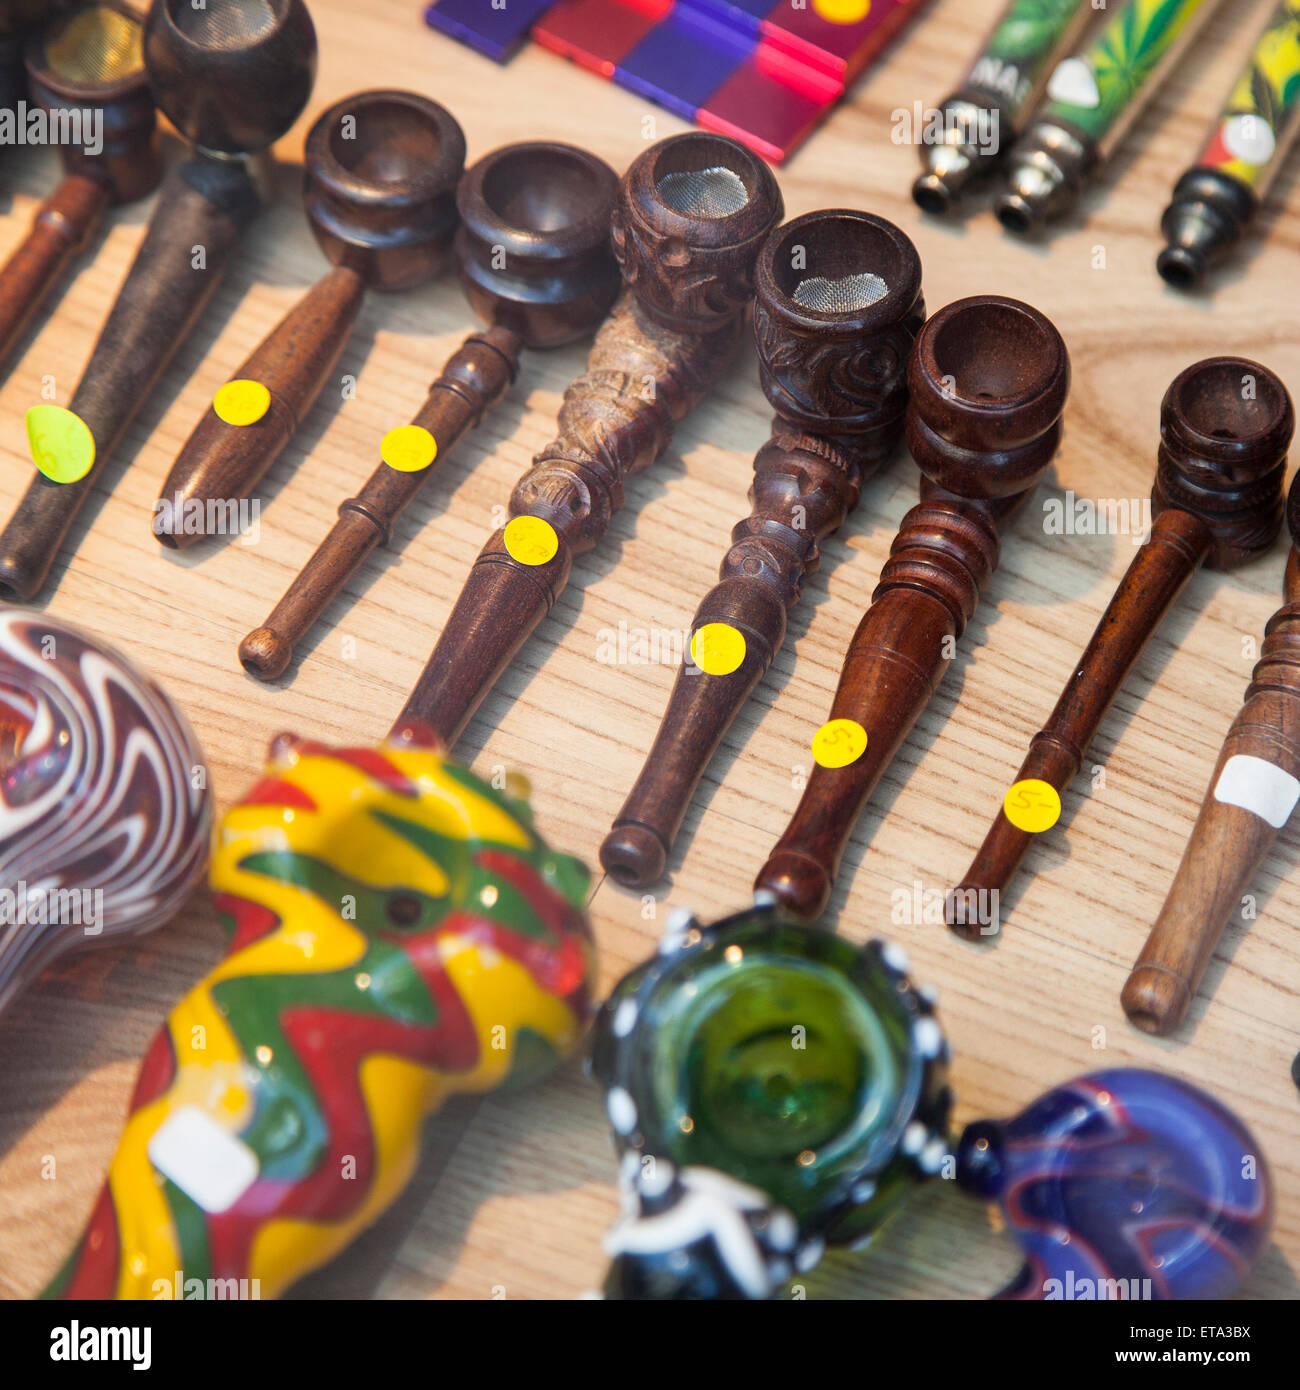 many different sorts of hash pipes for sale in amsterdam shop Stock Photo